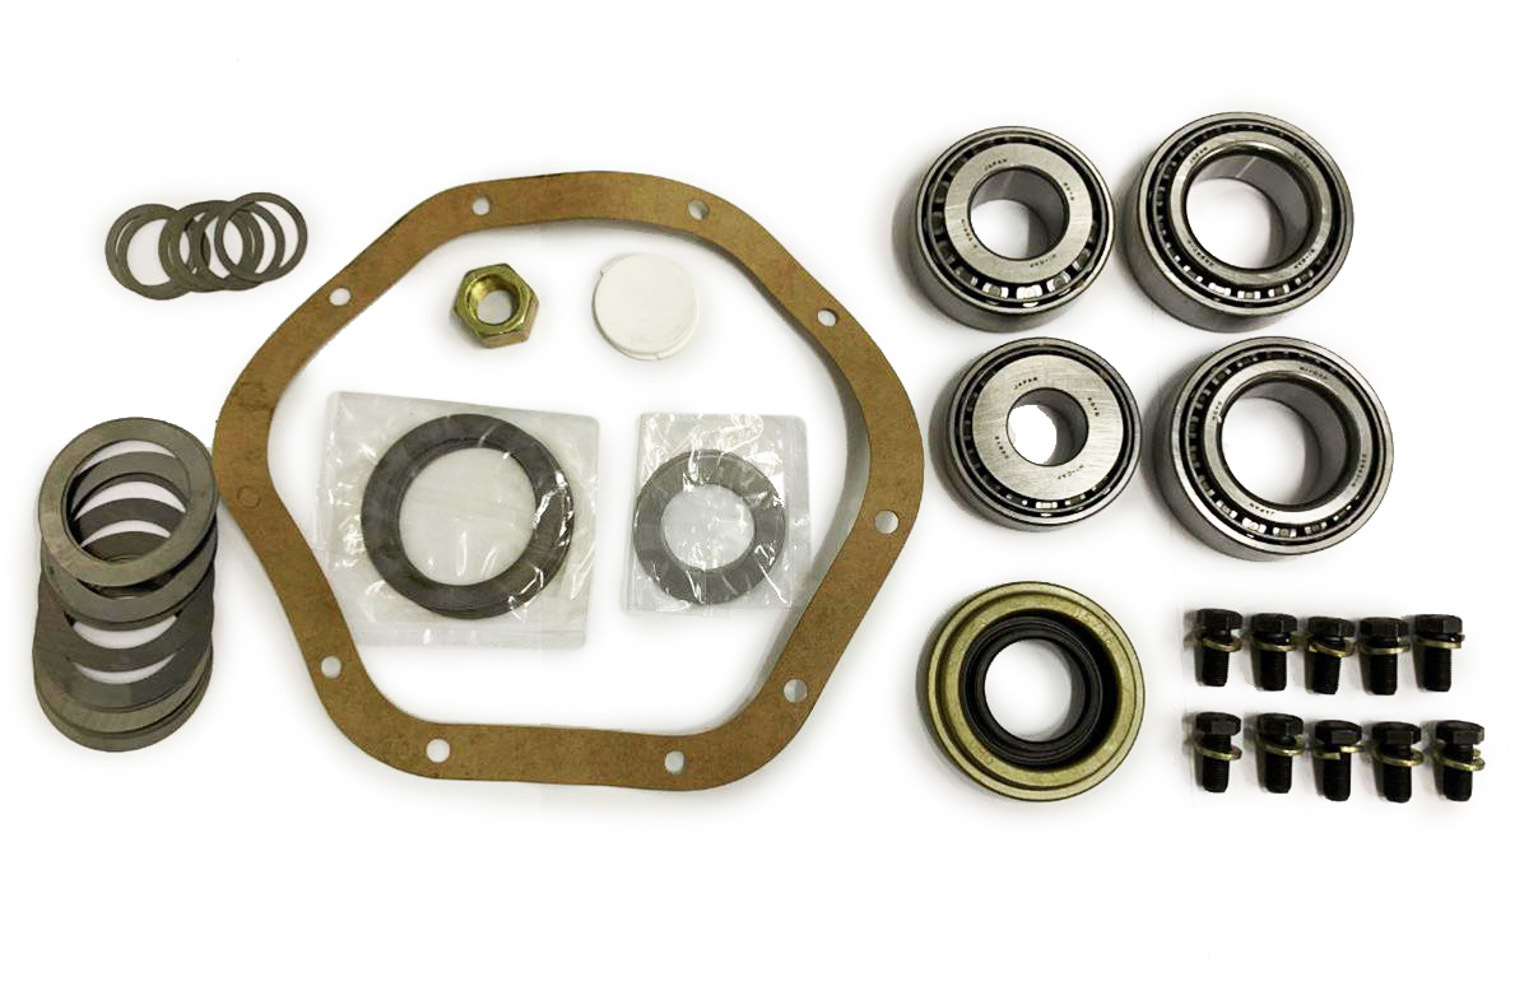 Ratech 322K Differential Installation Kit, Complete, Bearings / Crush Sleeve / Gaskets / Hardware / Seals / Shims / Marking Compound, Dana 44, Kit